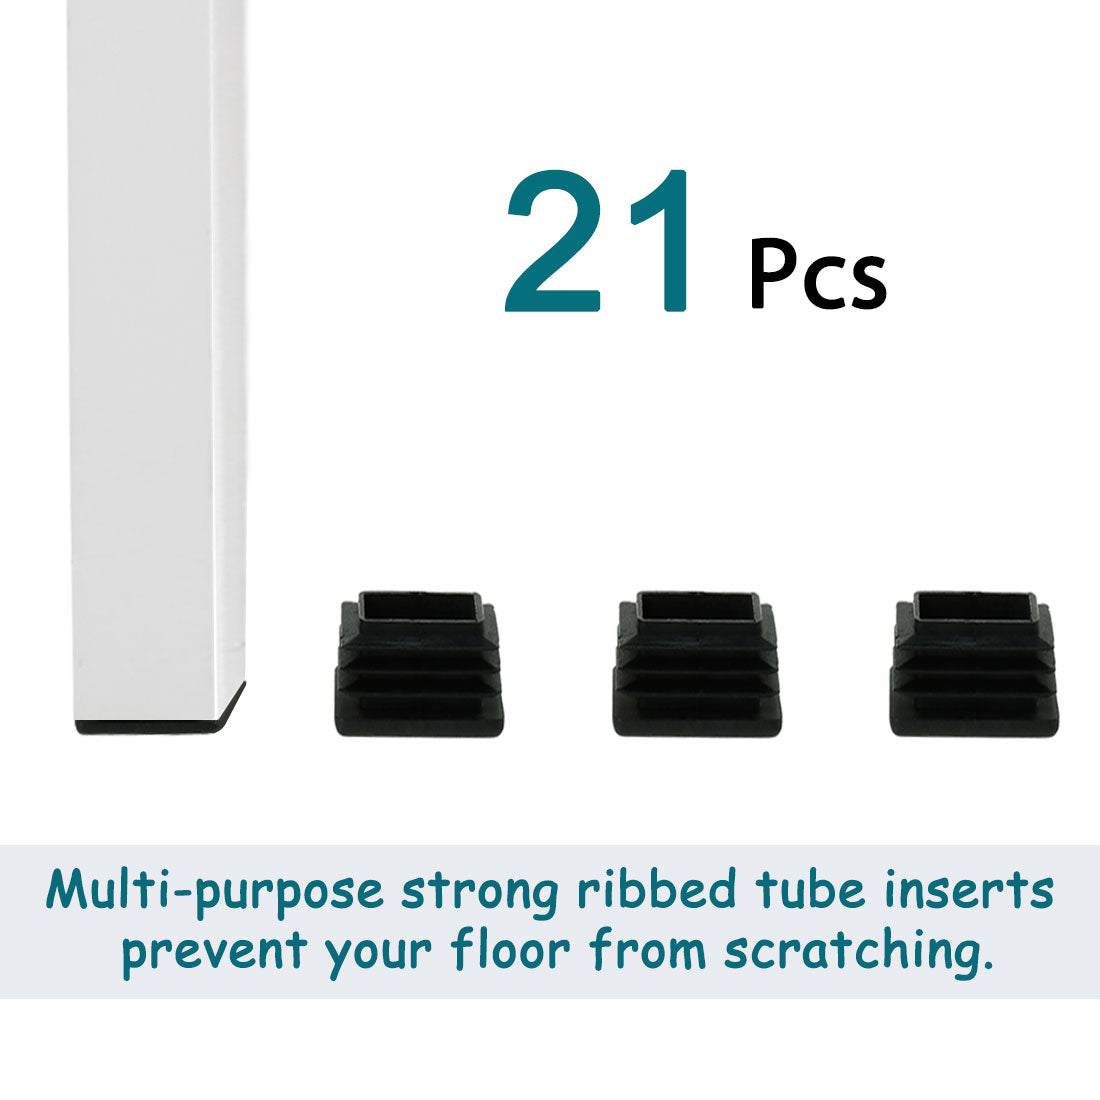 Uxcell Uxcell Square Tube Inserts Chair Floor Protector for 1.38" to 1.46" Inner Size 21pcs